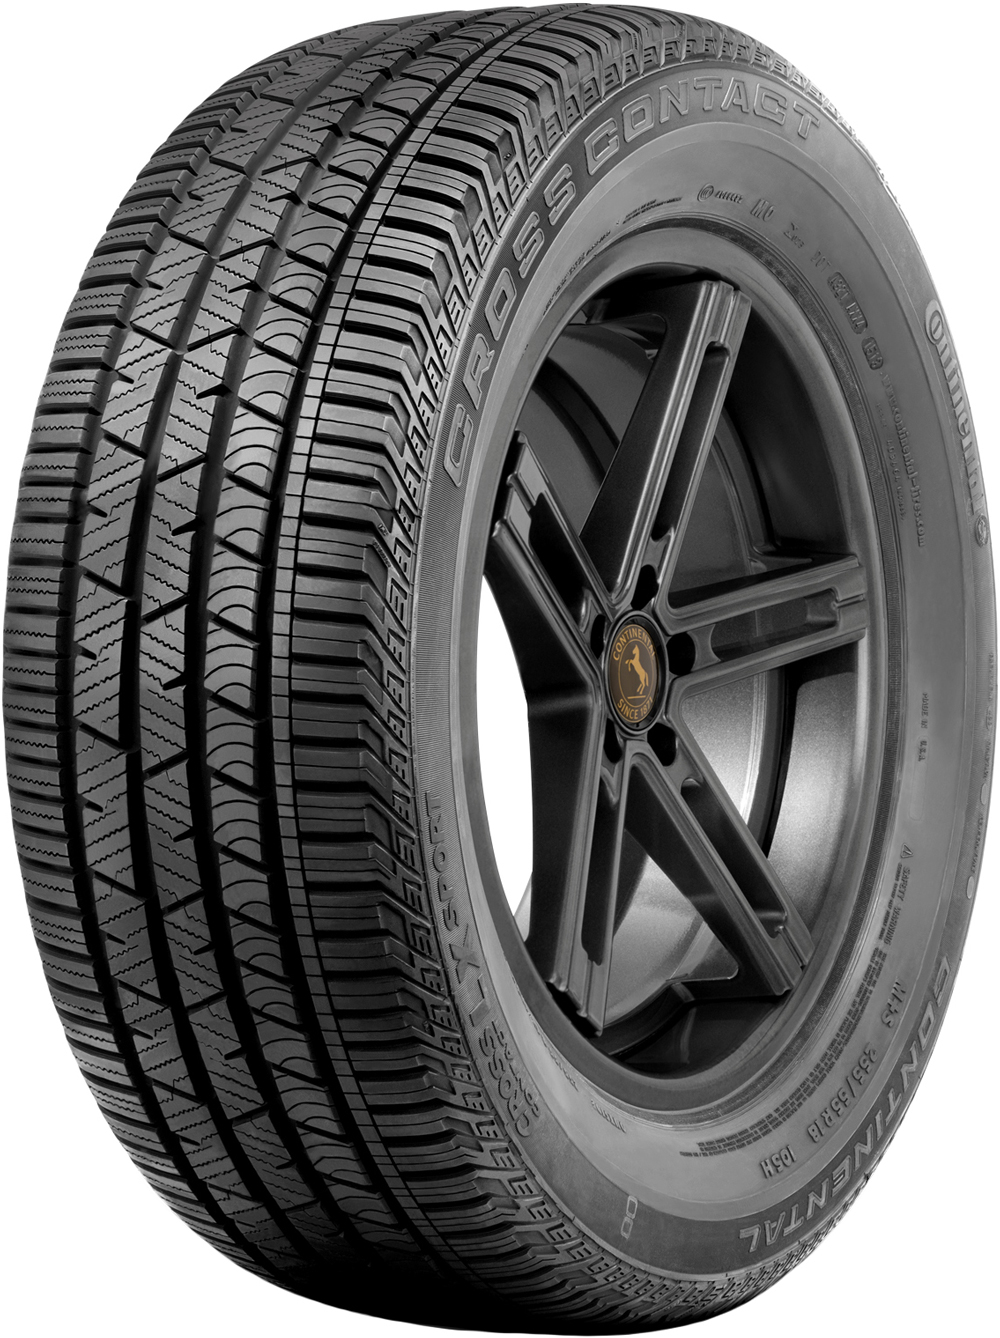 Anvelope auto CONTINENTAL Conti Cross Contact LX Sport XL FP 275/40 R22 108